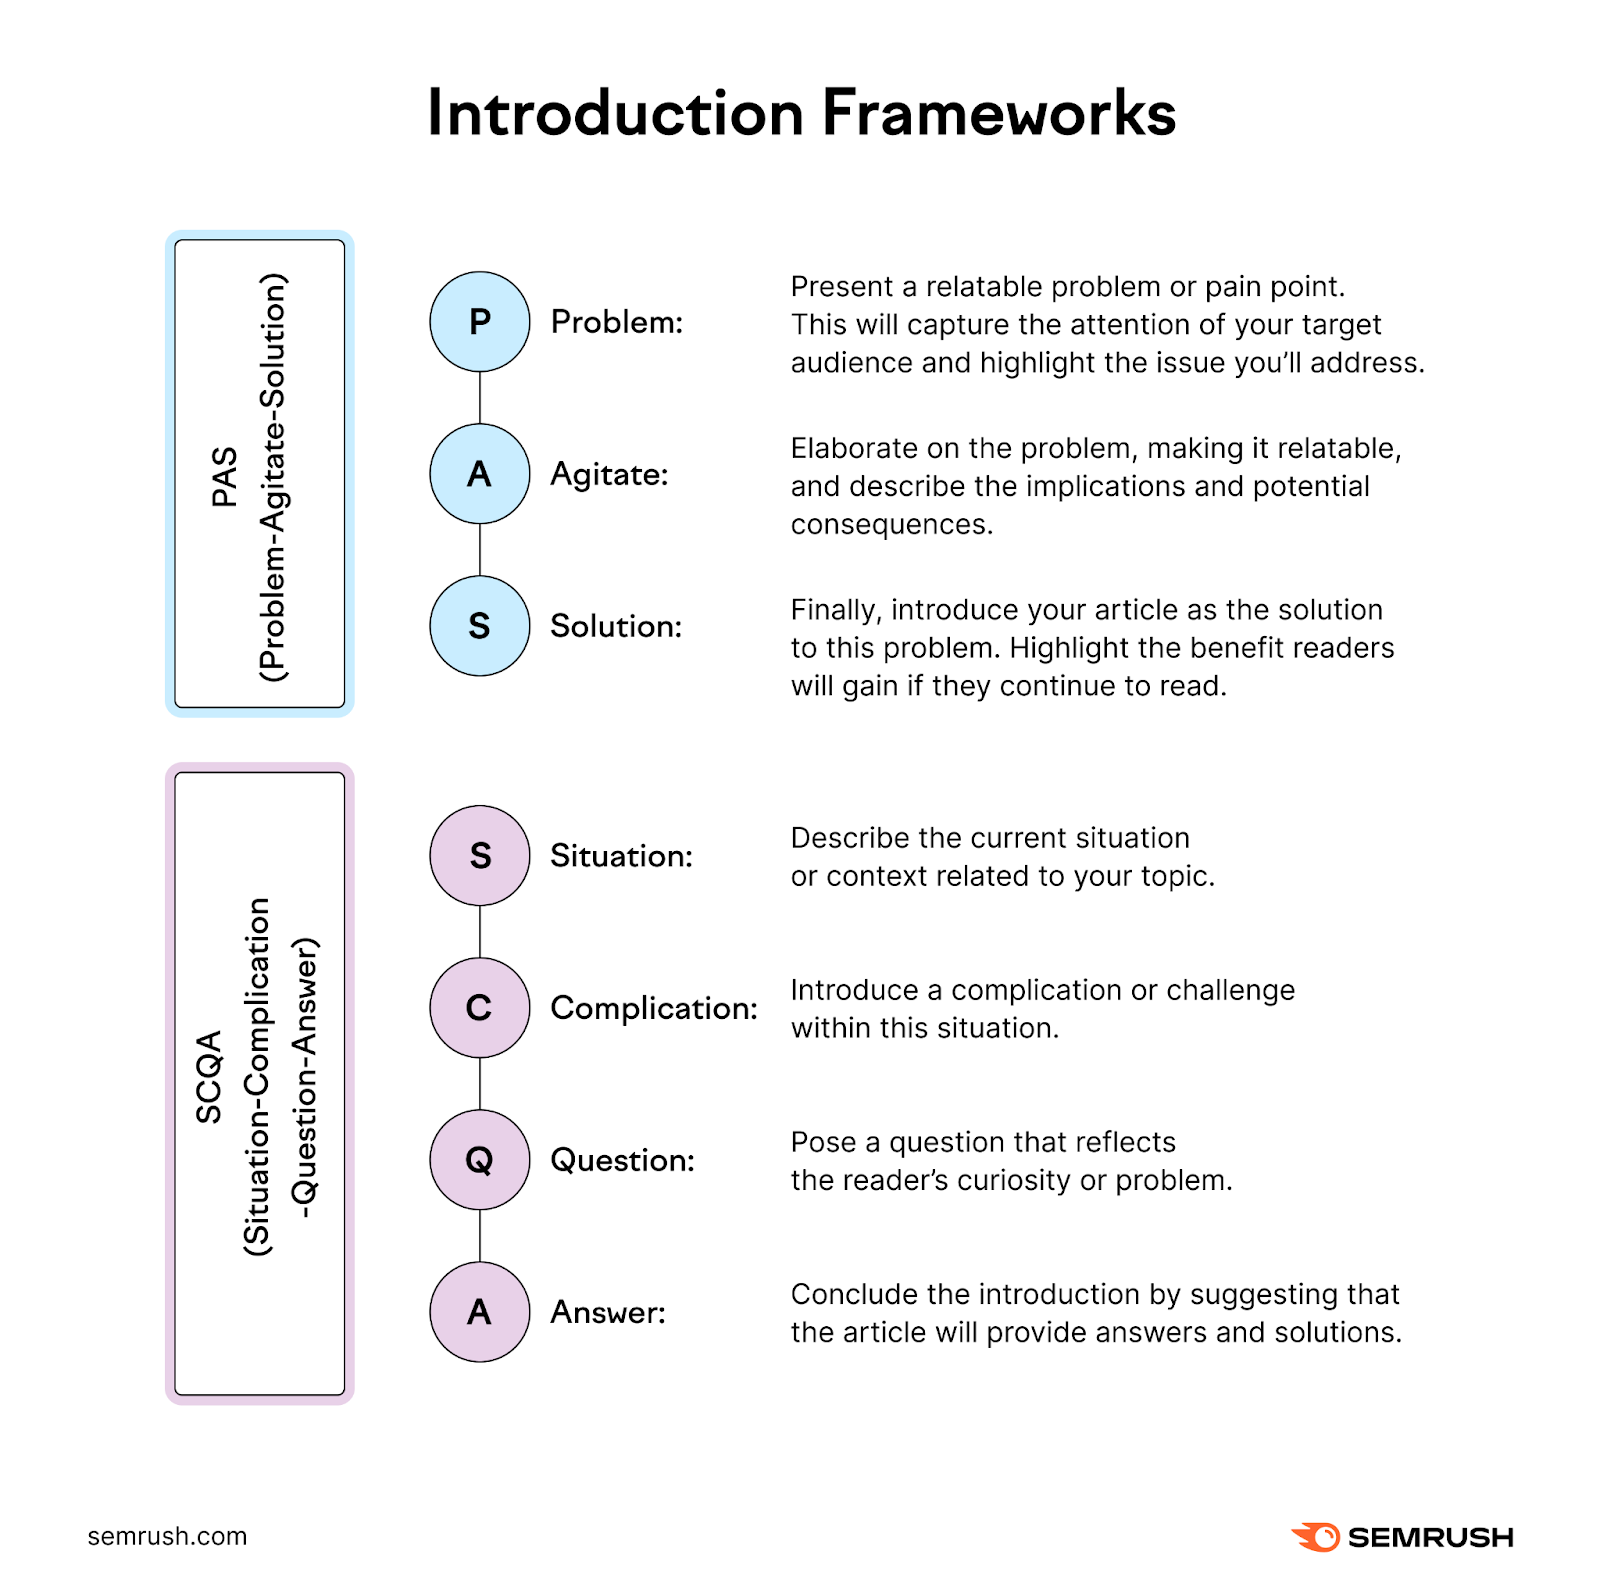 Introduction Frameworks showing outlines for PAS and SCQA